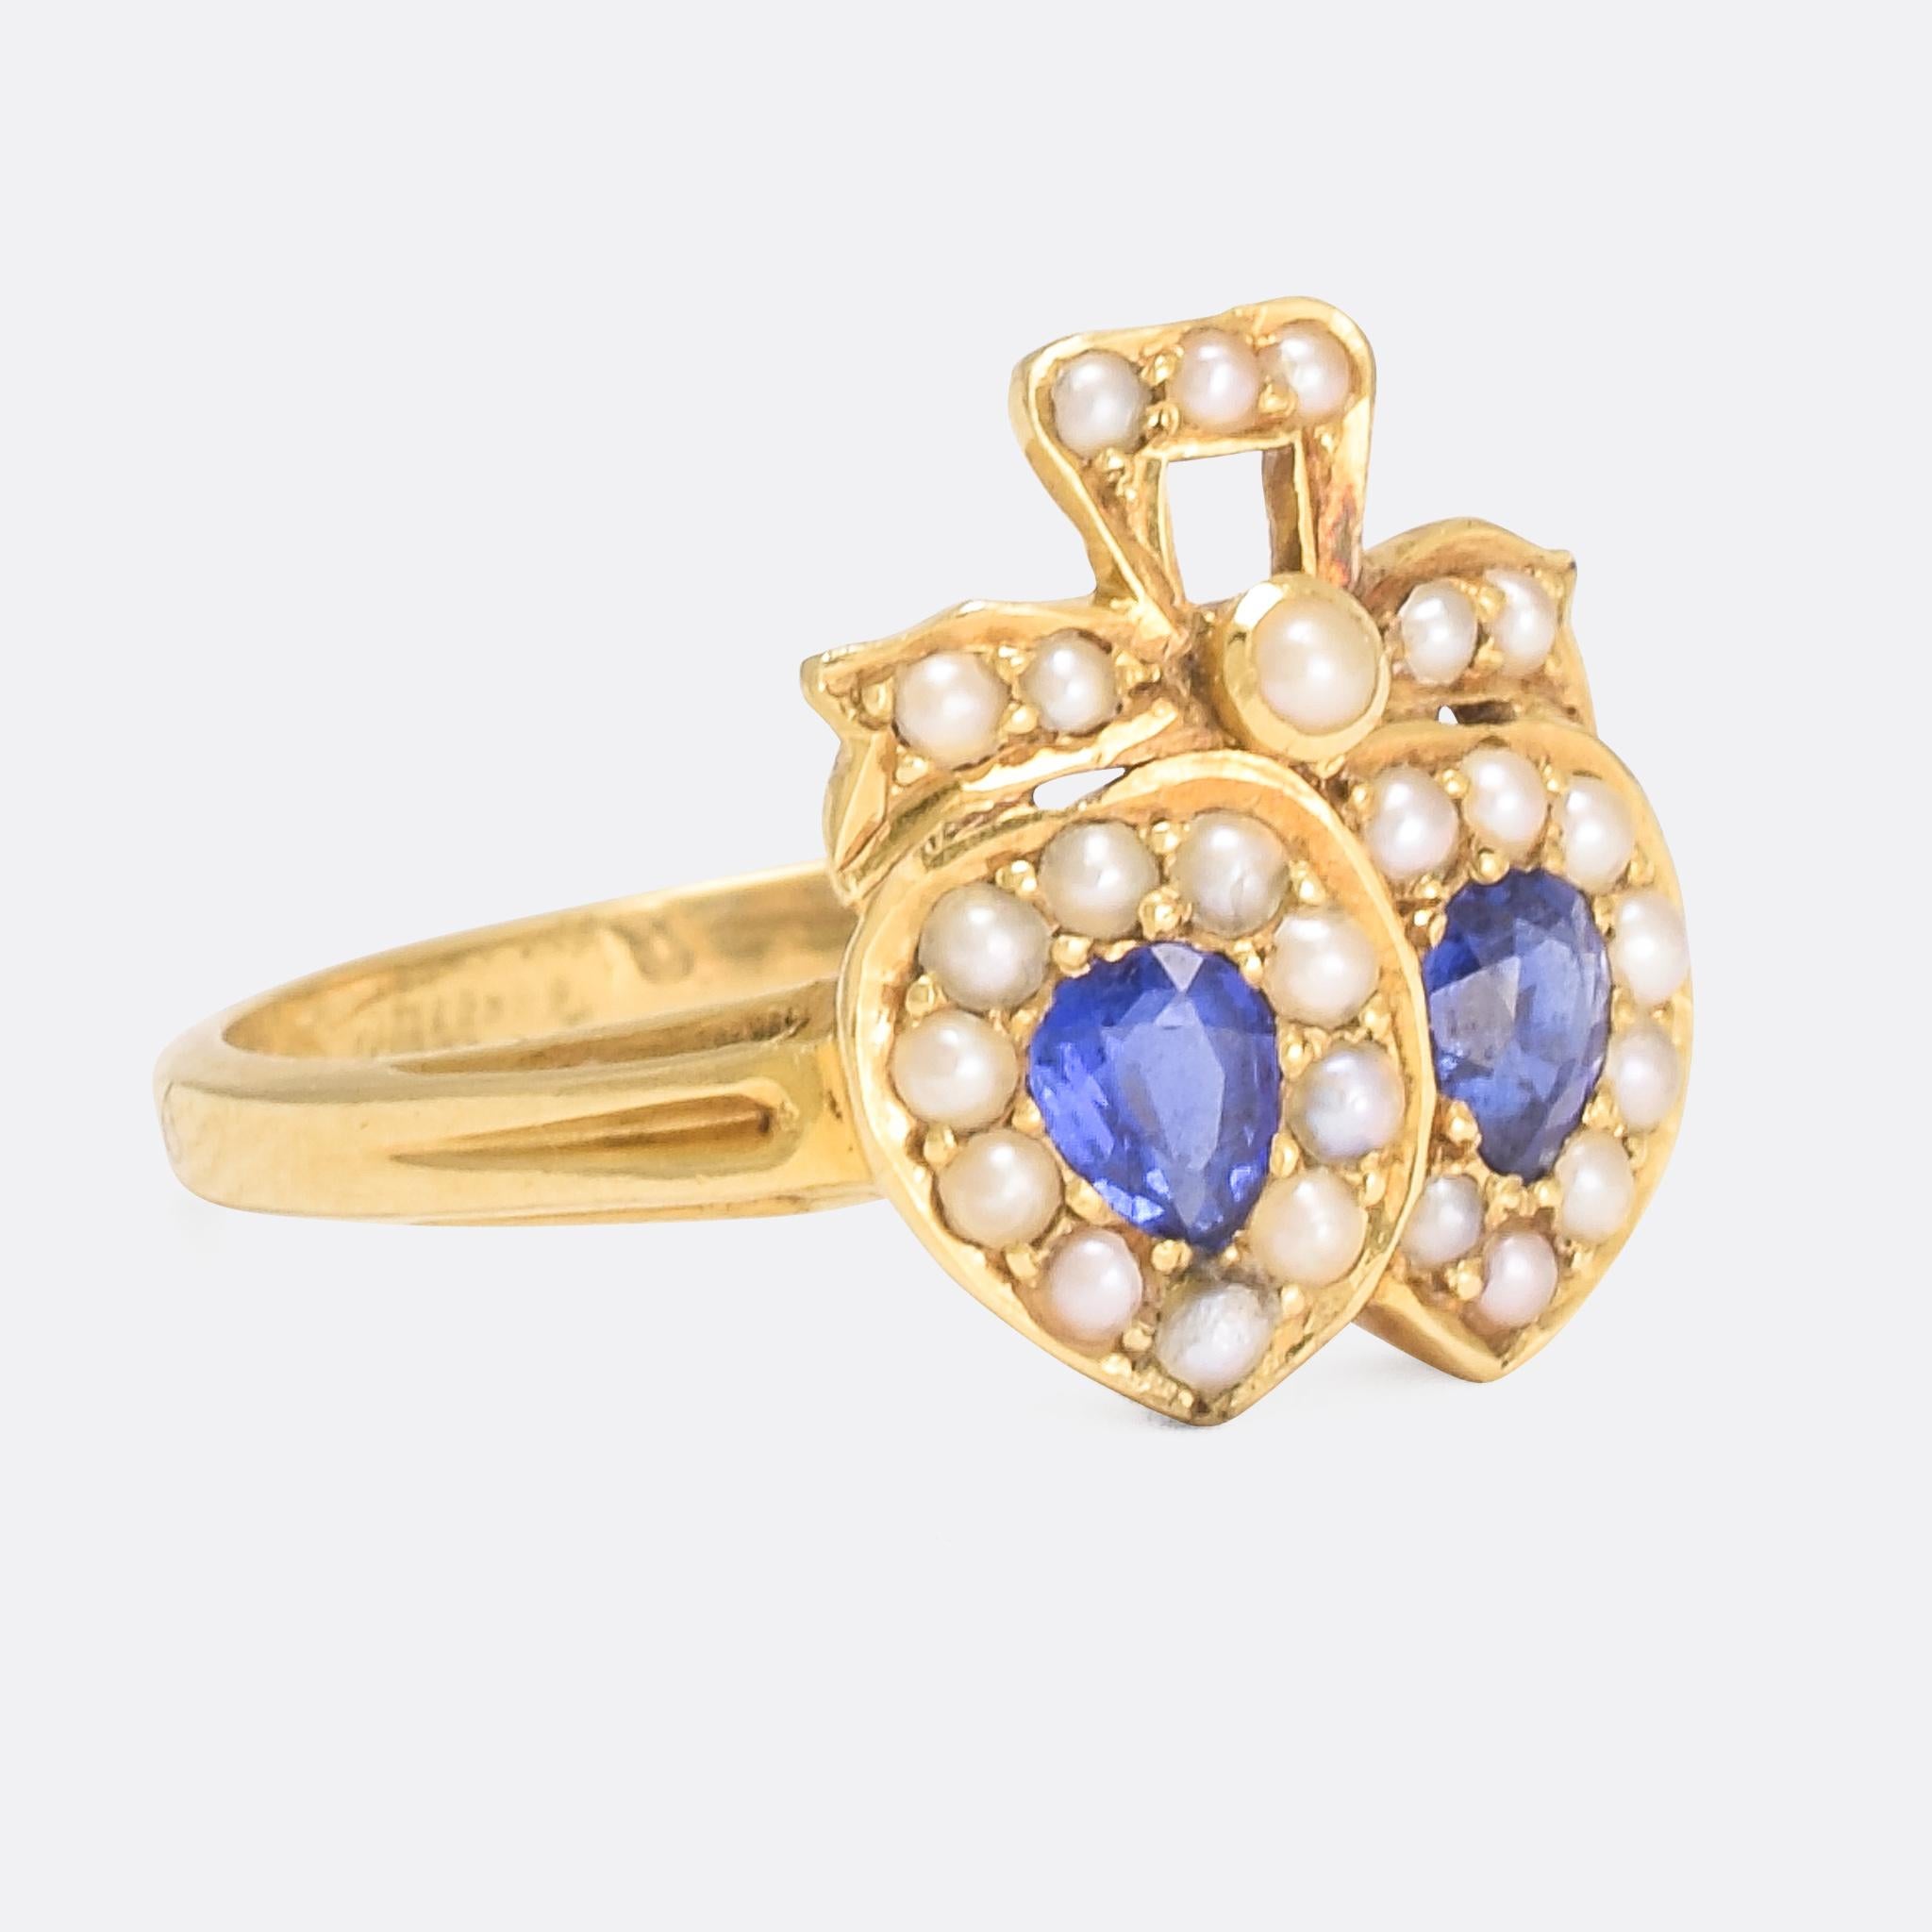 A beautiful antique double heart ring set with vibrant blue sapphires and split pearls. It's a lovely design, the two hearts overlap where they meet, and sit beneath a pearl-set bow that's reminiscent of two swans. Modelled in 18k yellow gold, it